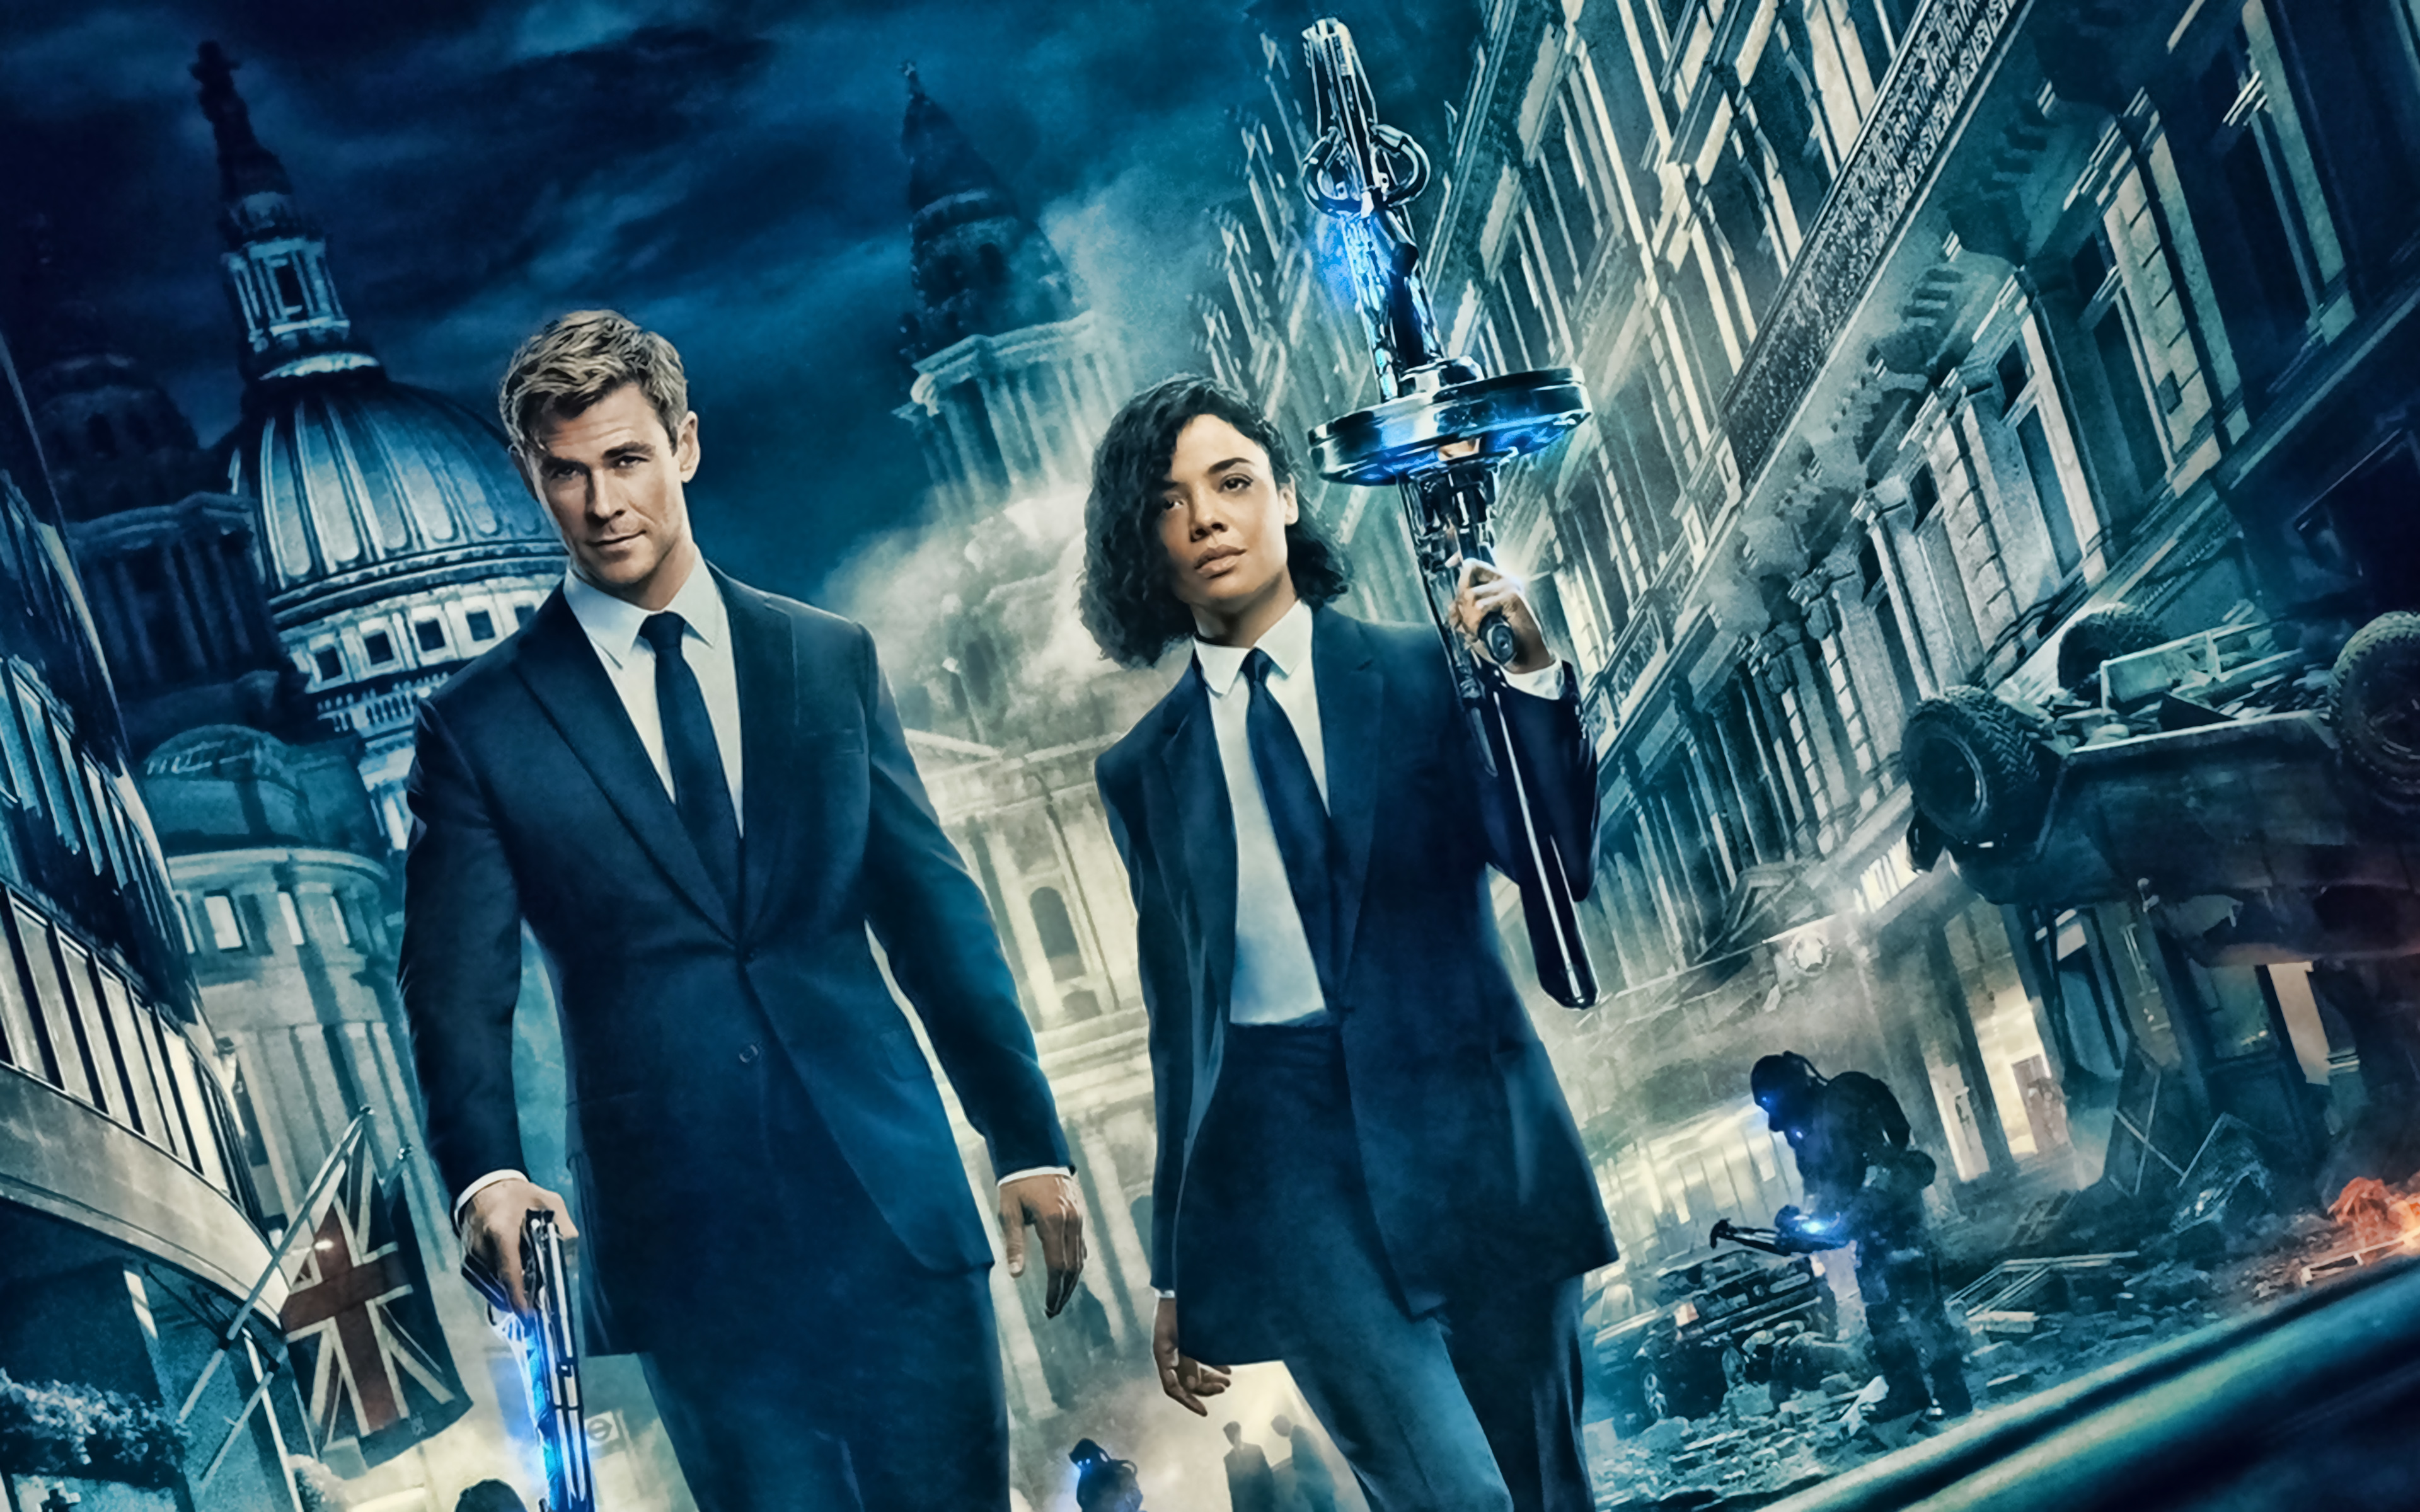 Download wallpaper 4k, Men In Black International, Agent H, Agent M, 2019 movie, Science fiction, Chris Hemsworth, Tessa Thompson for desktop with resolution 3840x2400. High Quality HD picture wallpaper